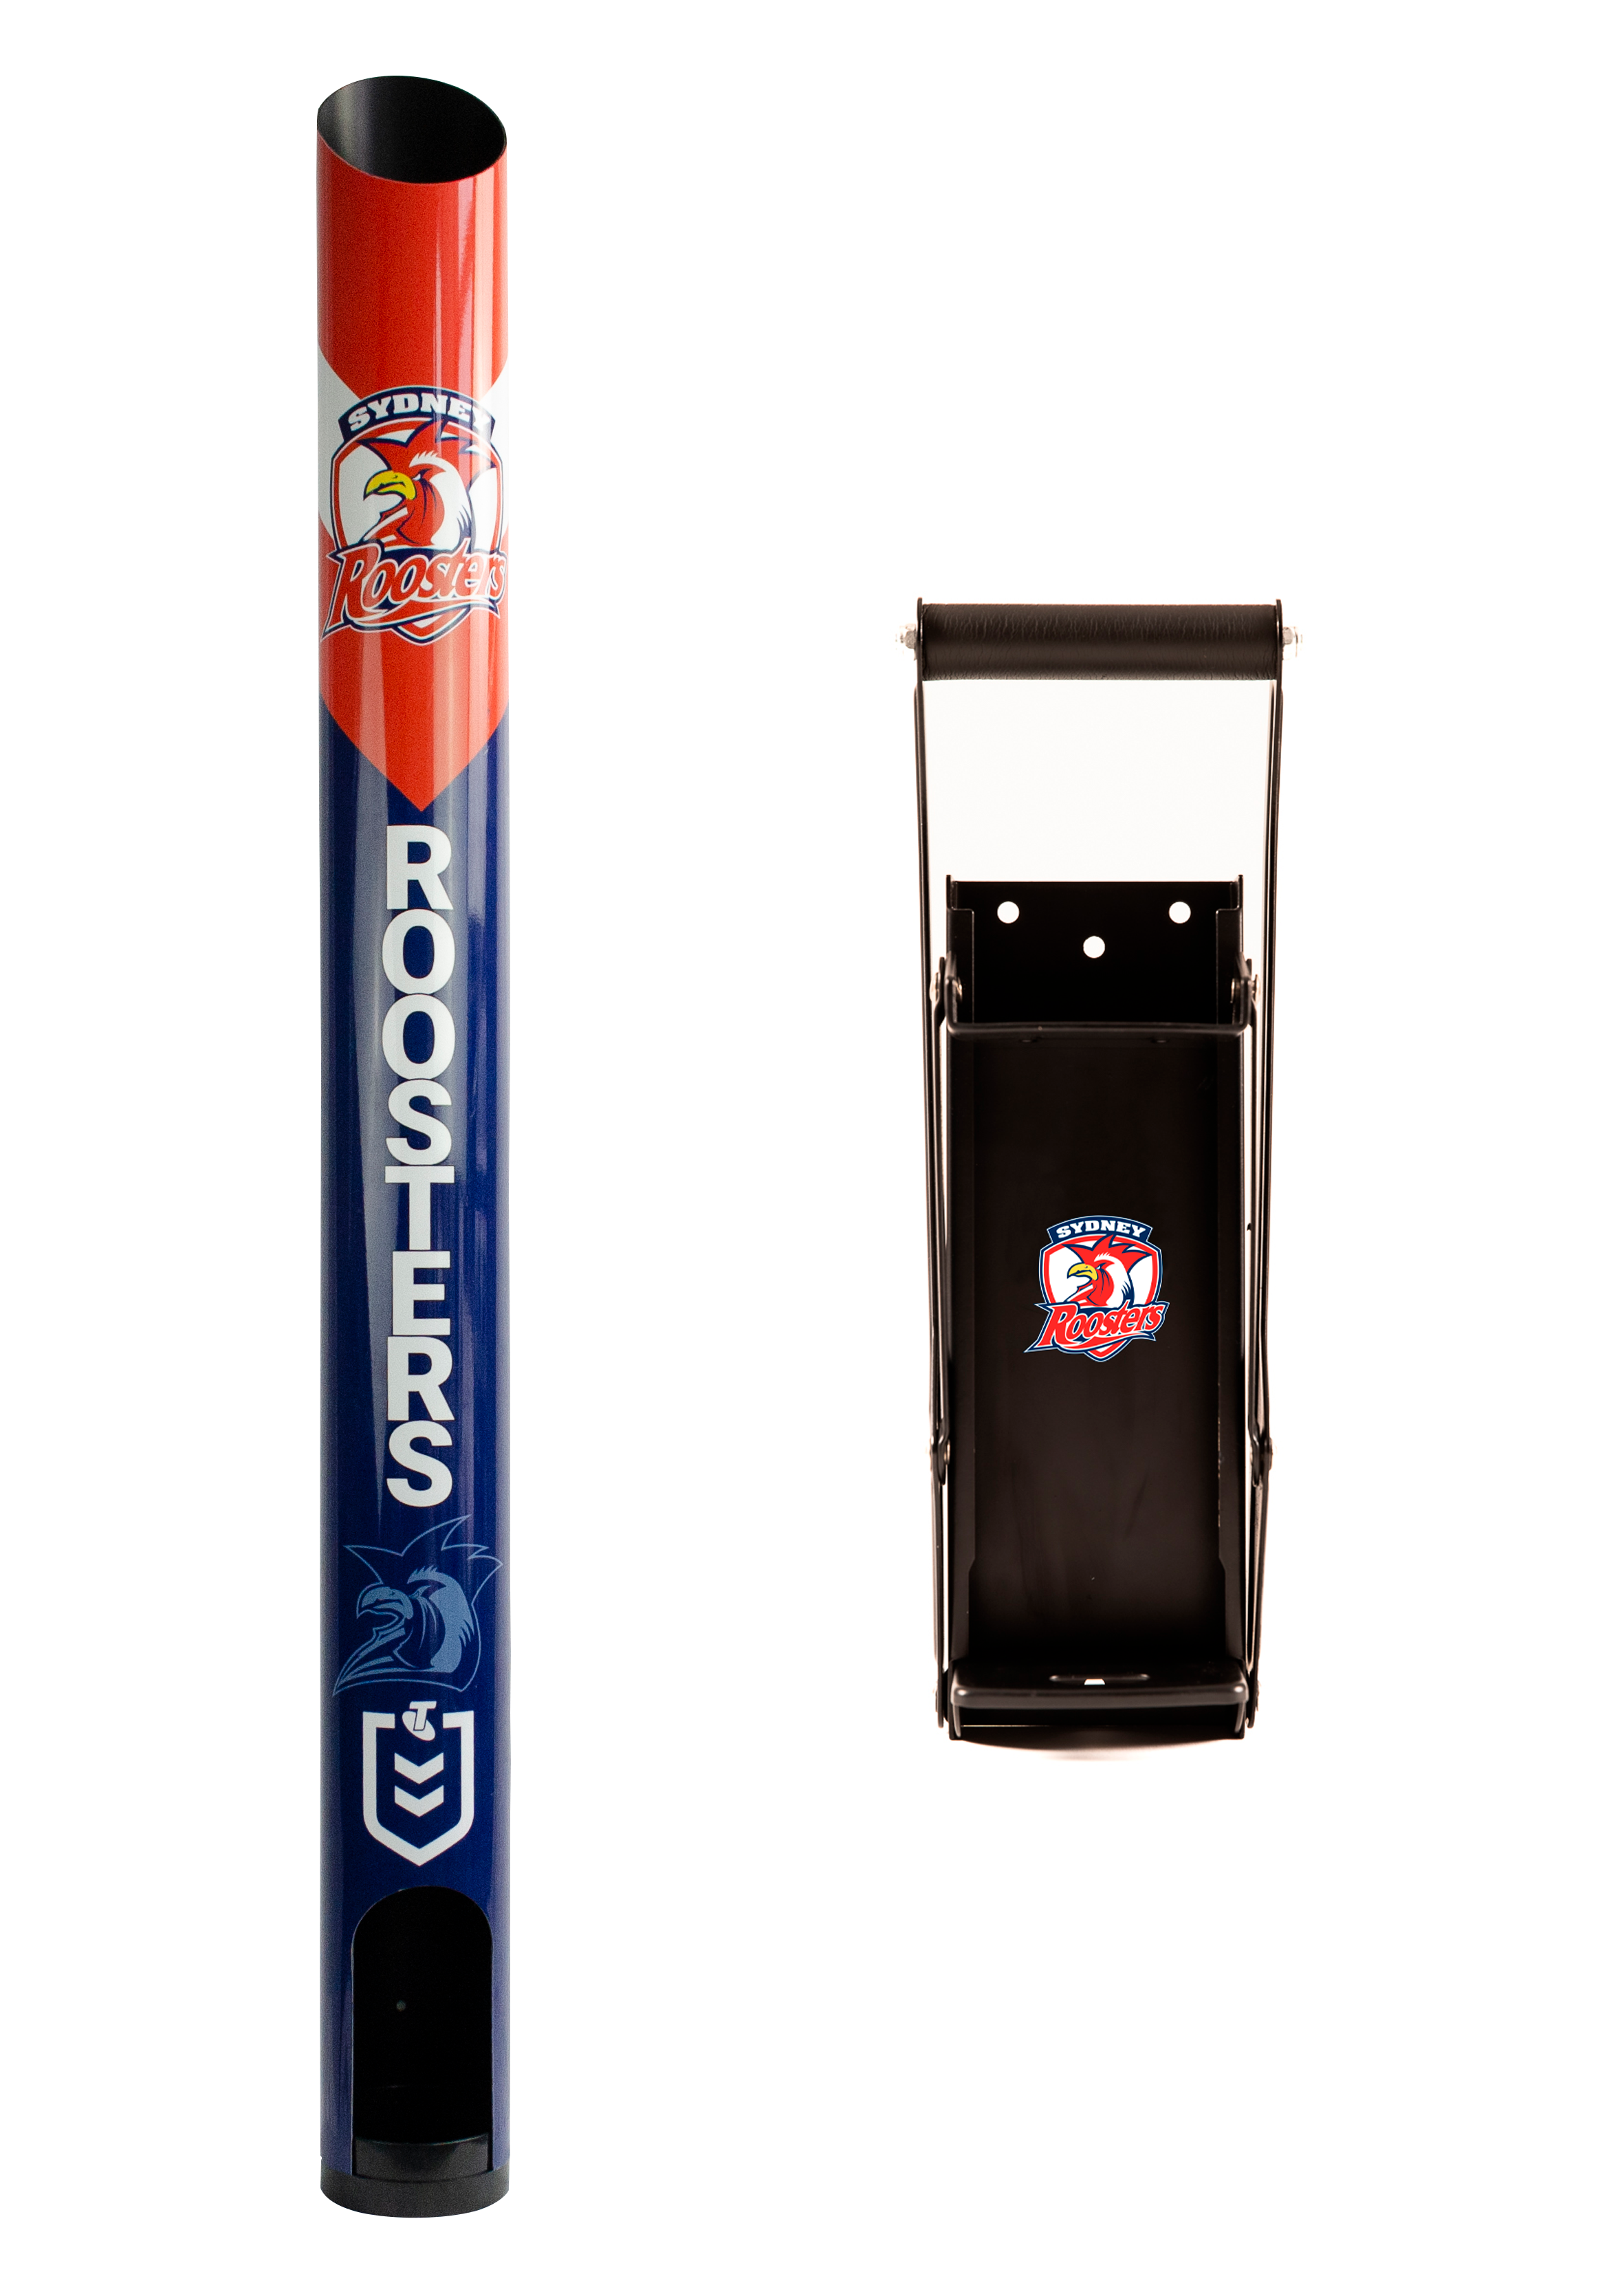 Sydney Roosters NRL Dispenser + Can Crusher Combo